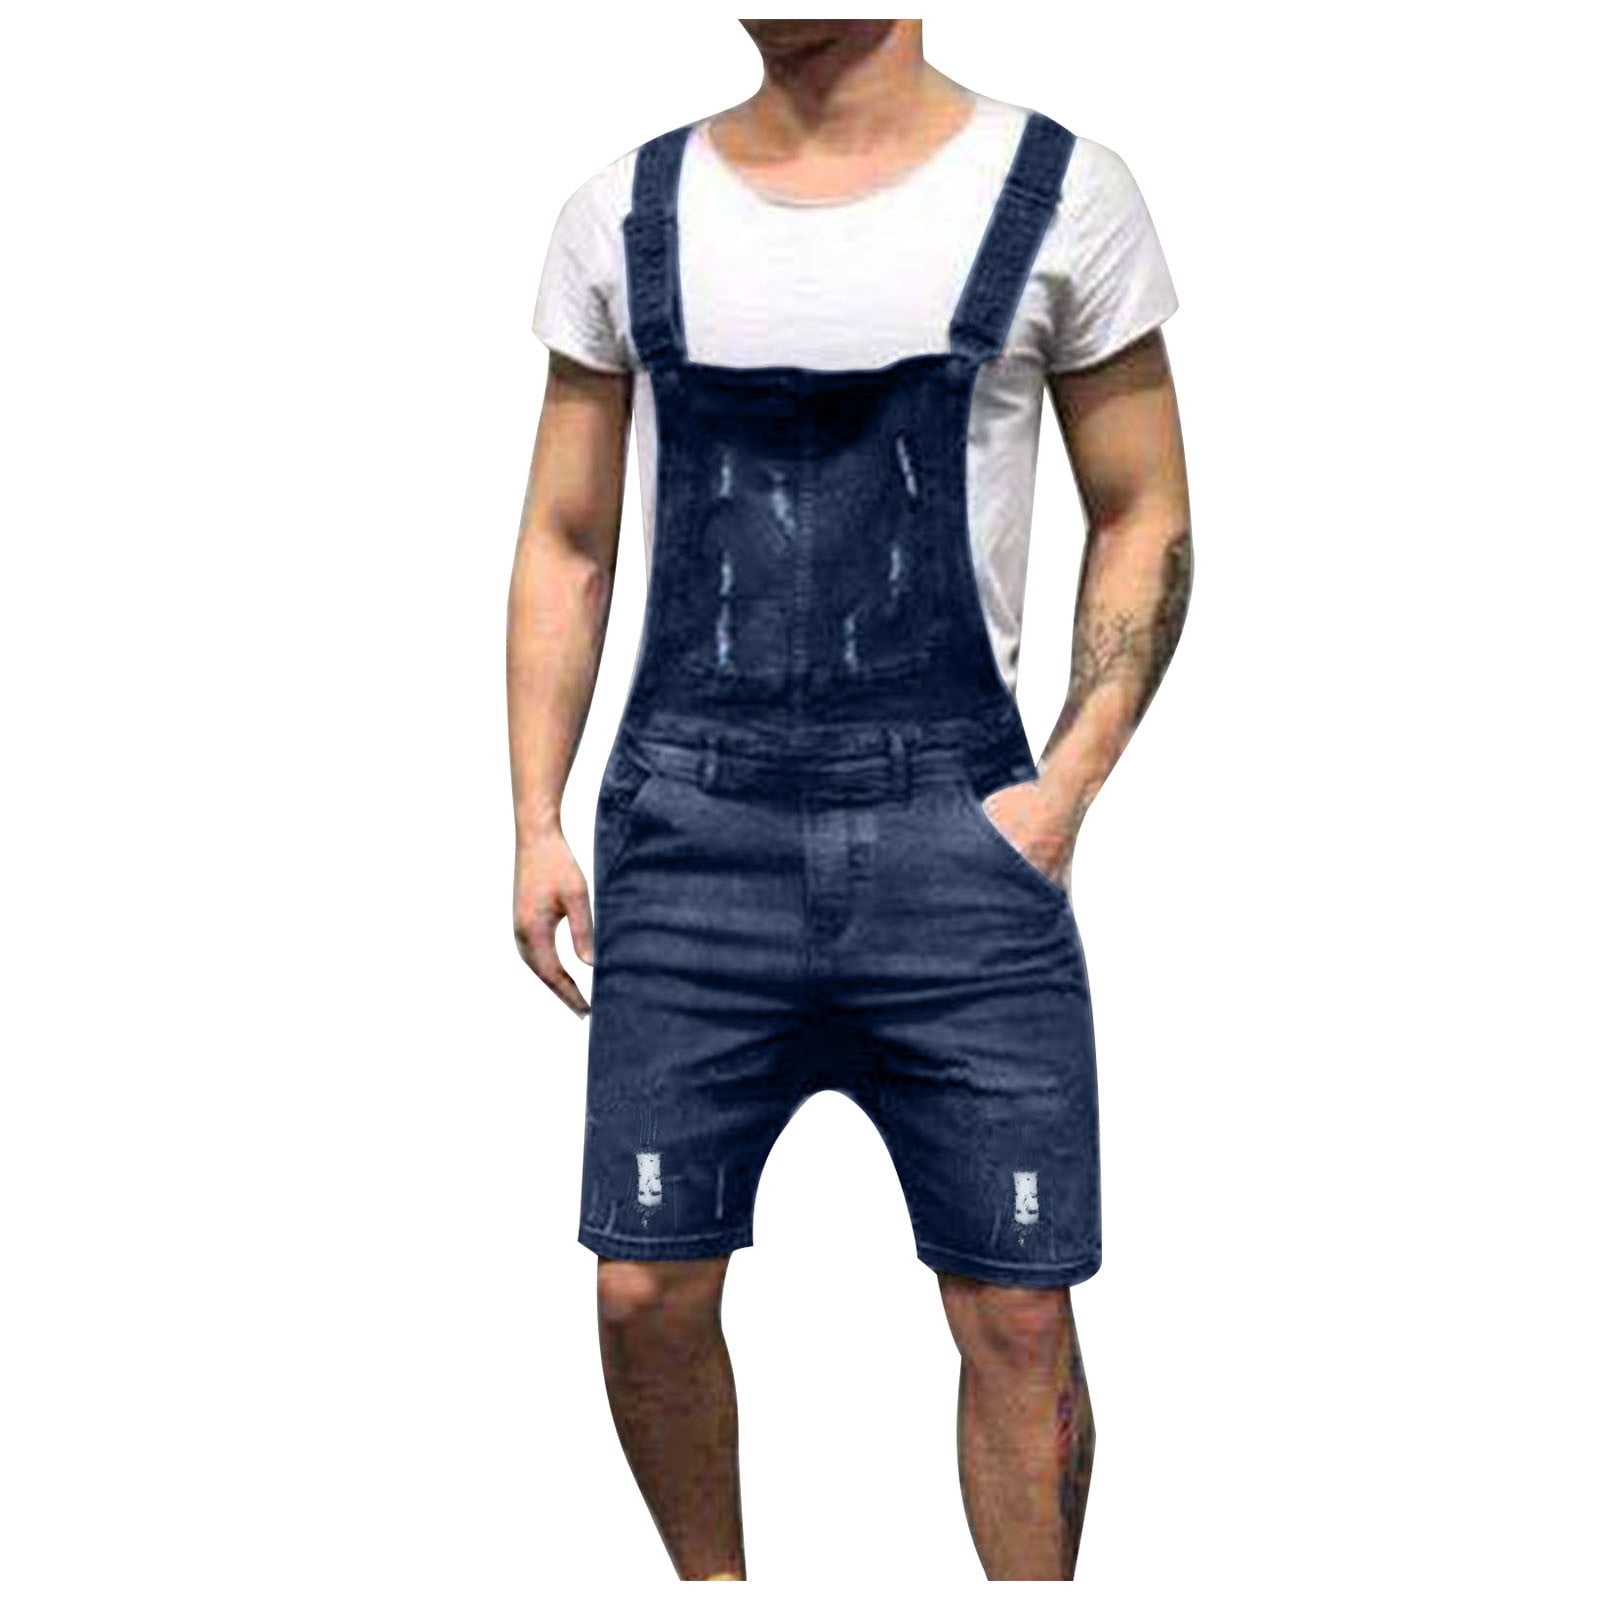 IROINNID Men's Casual Overalls Jeans Fashion Comfy Workout Denim Shorts ...